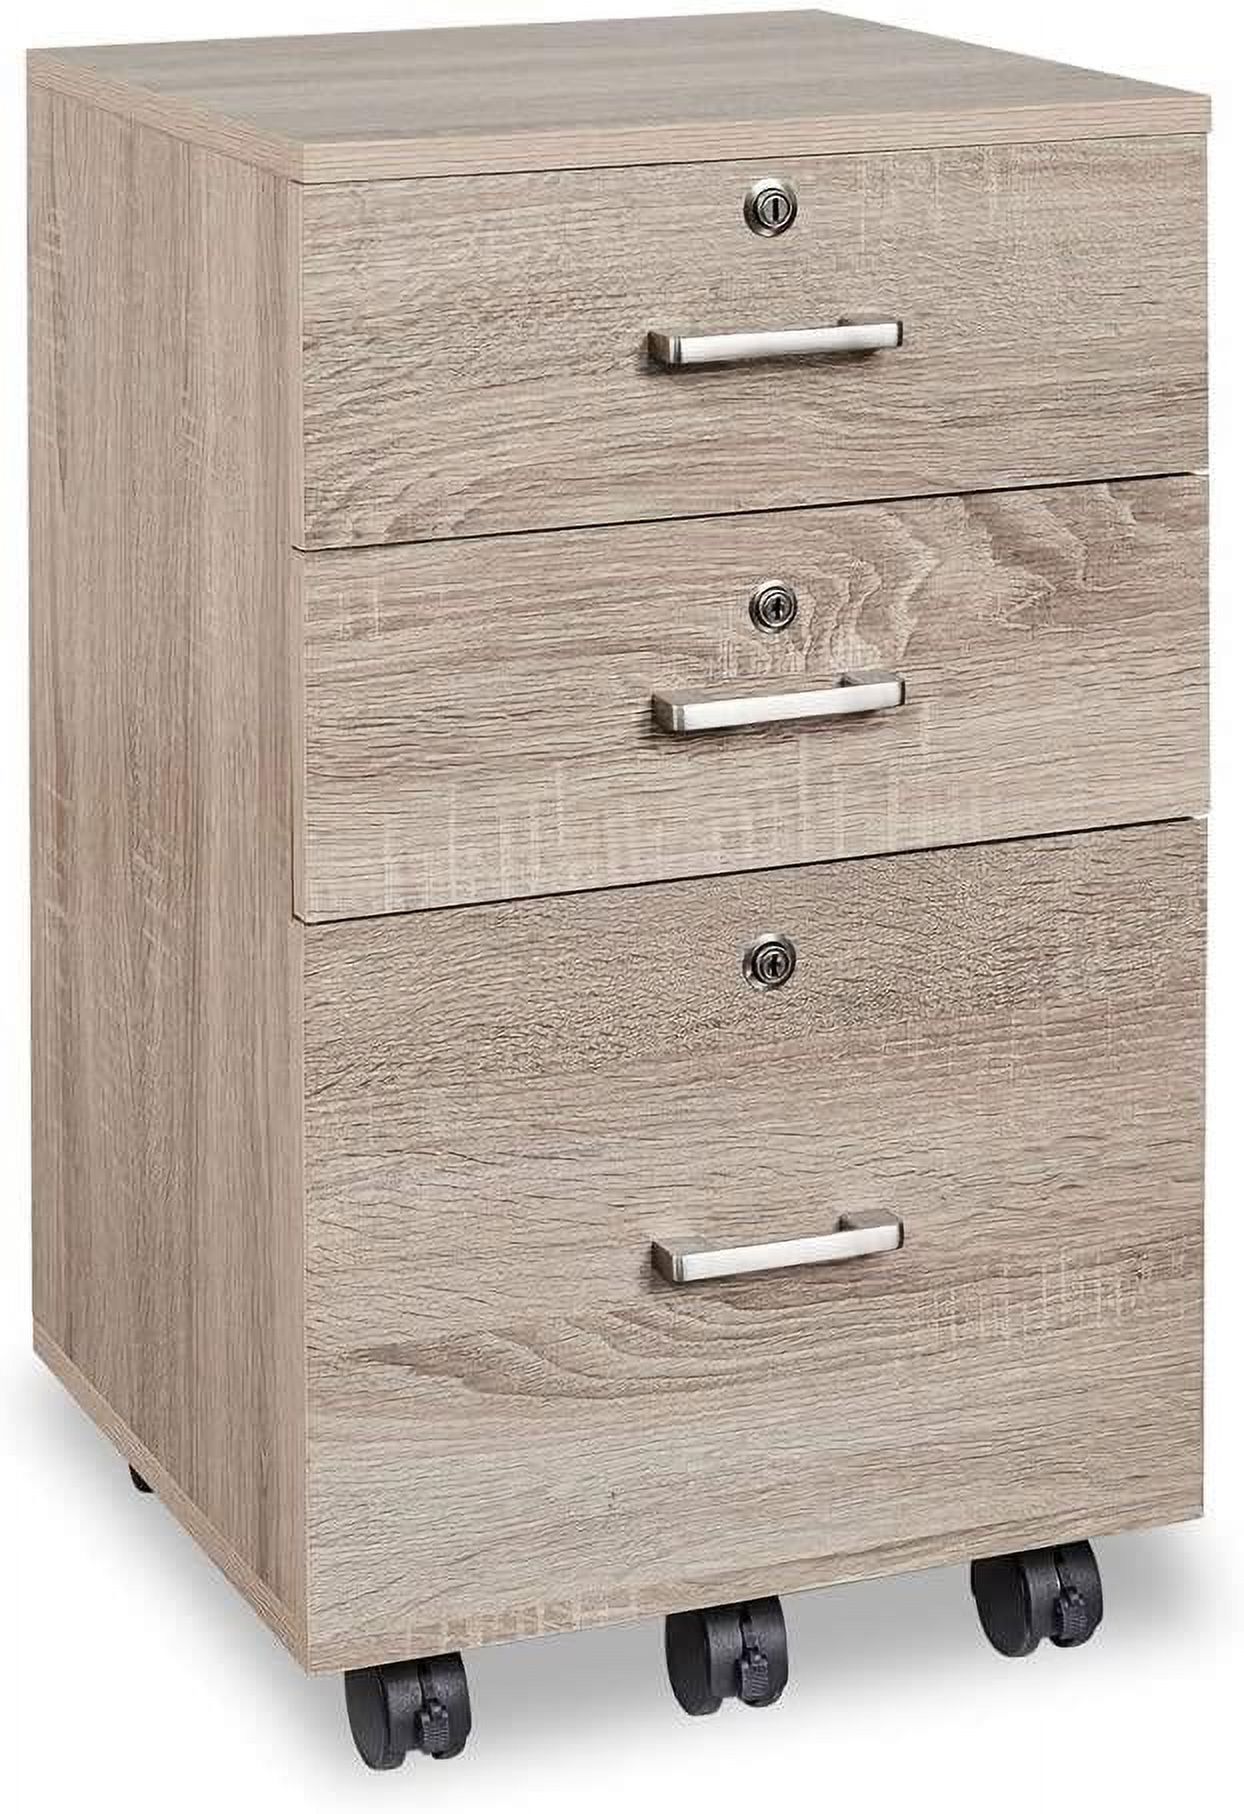 GoDecor 3-Drawer Rolling Wood File Cabinet with Lock,Oak - image 1 of 6